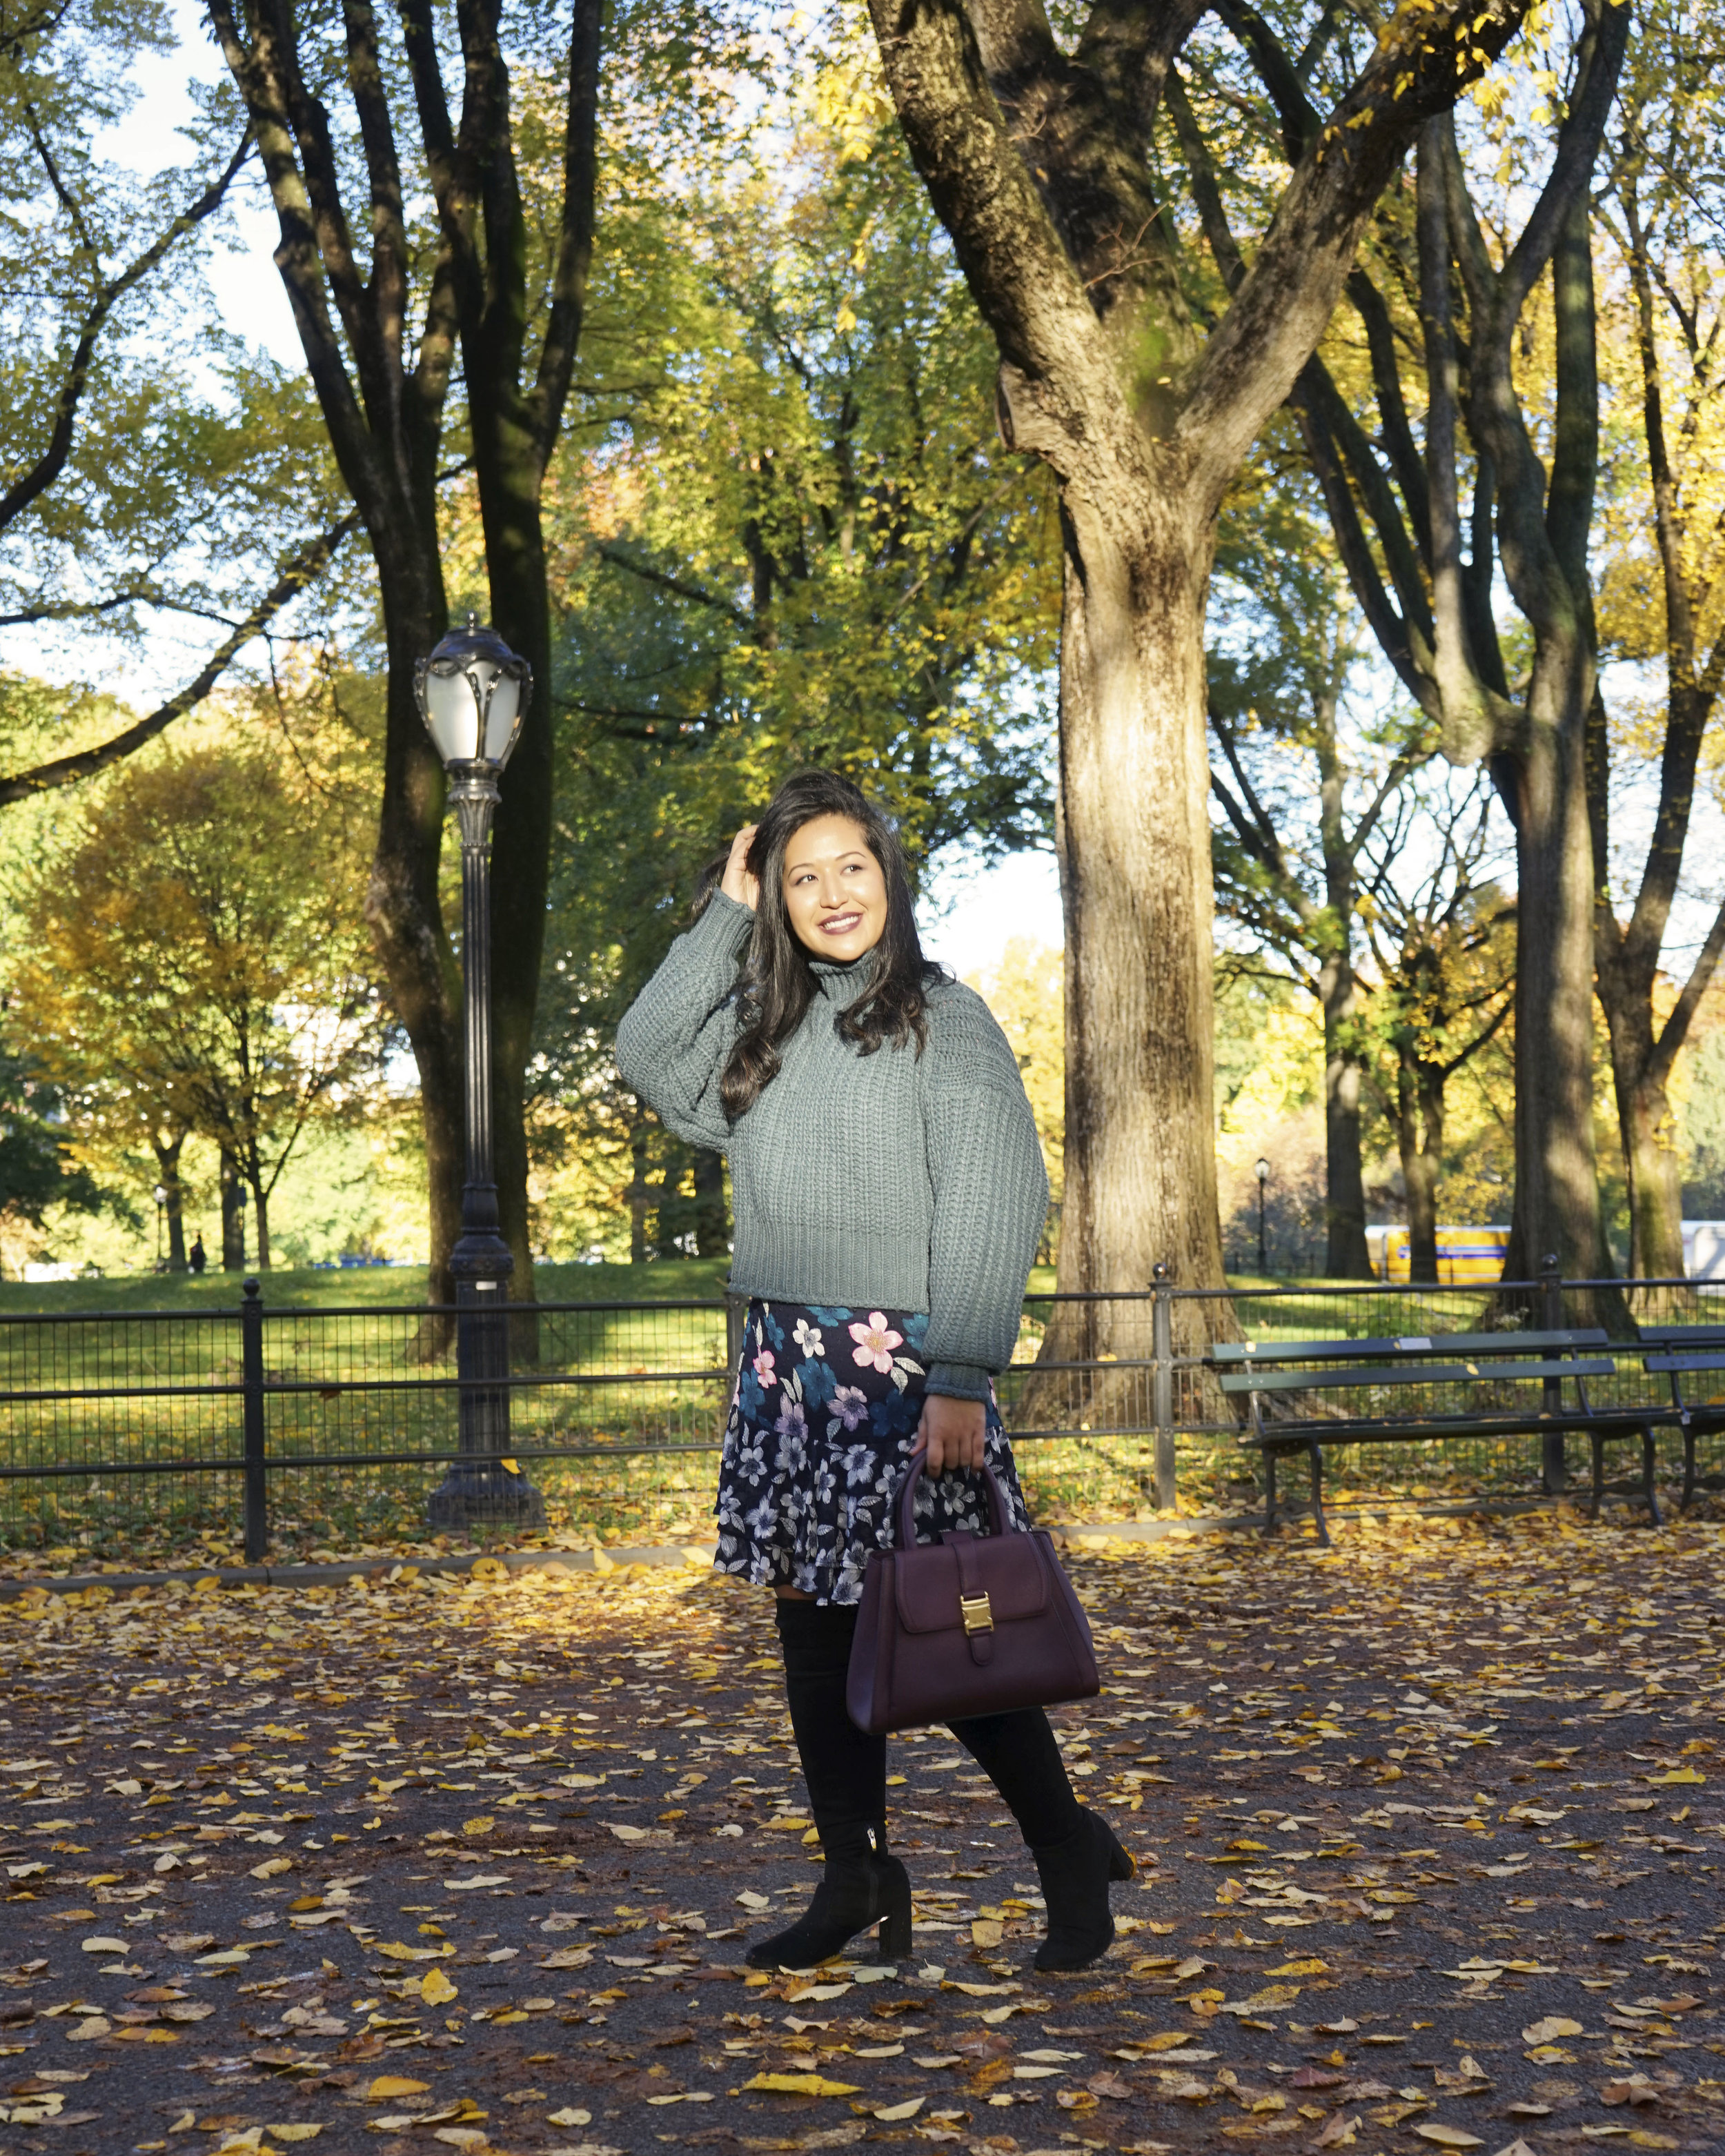 Krity S x Fall Outfit x Thanksgiving Look3.jpg